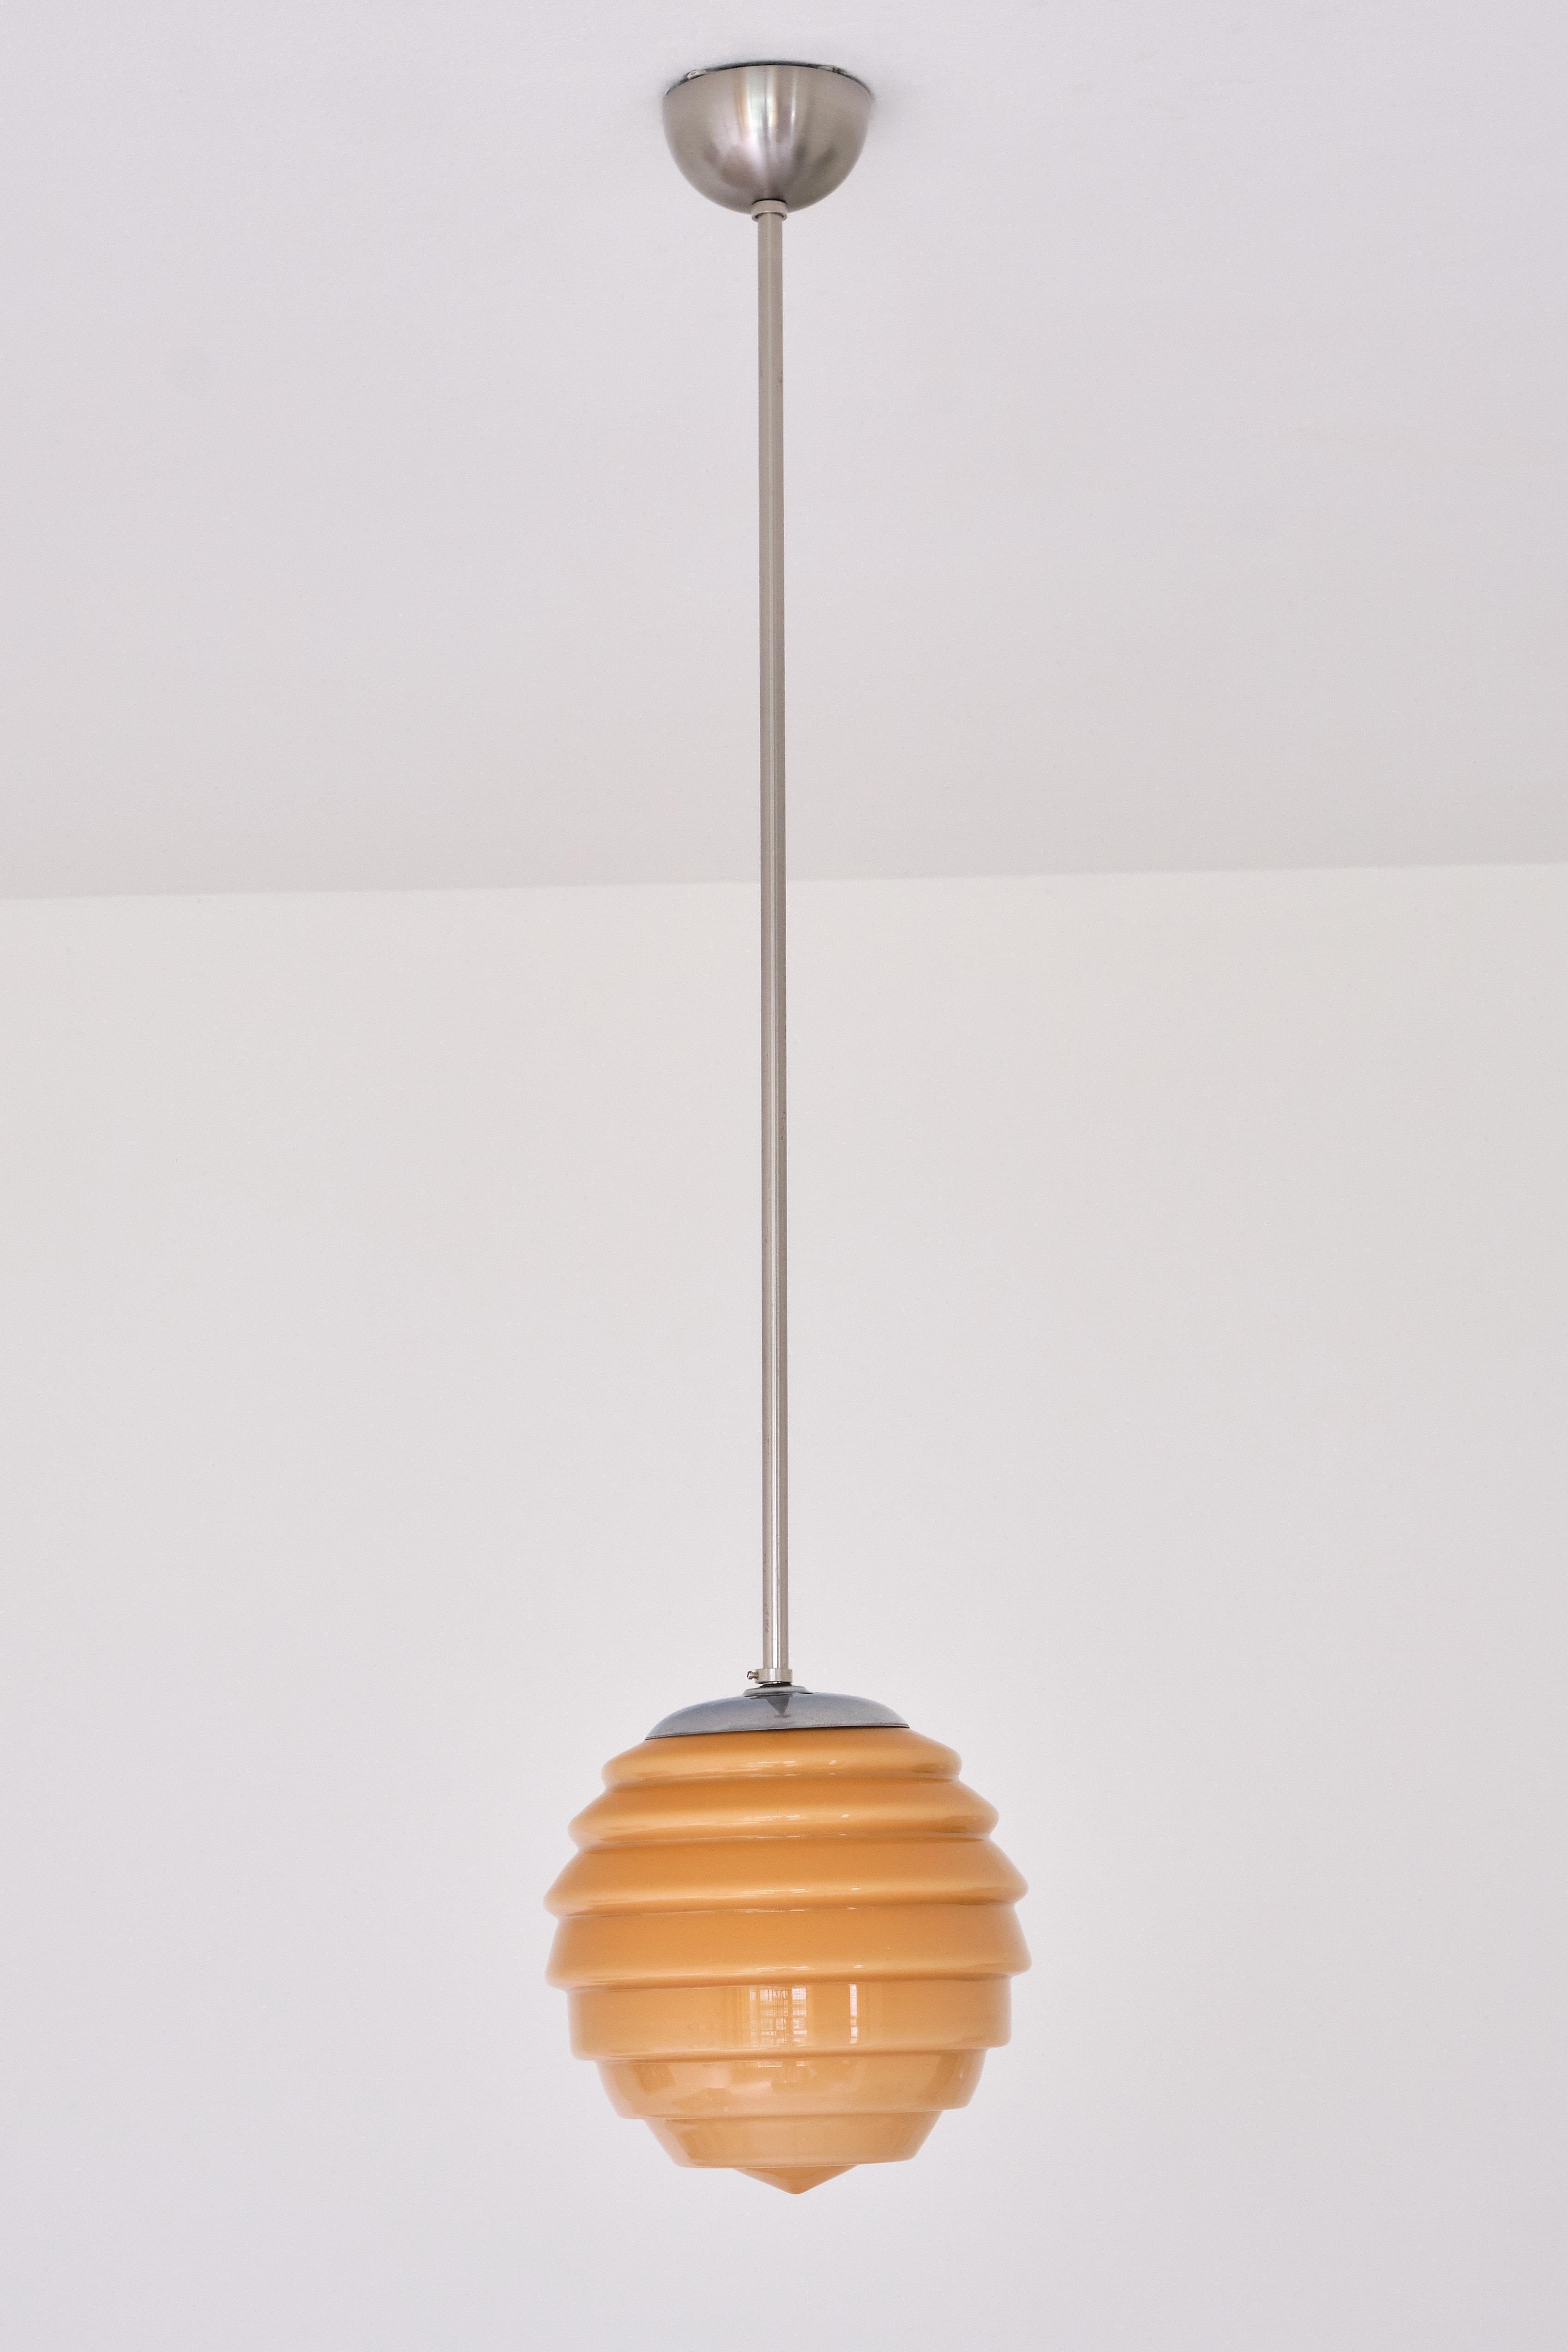 This elegant pendant light was produced in Sweden in the 1930s. The design is marked by the striking beehive shape of the glass shade. The tiered shade is made of a light peach orange glass in a very subtle gradient. When illuminated, the lamp